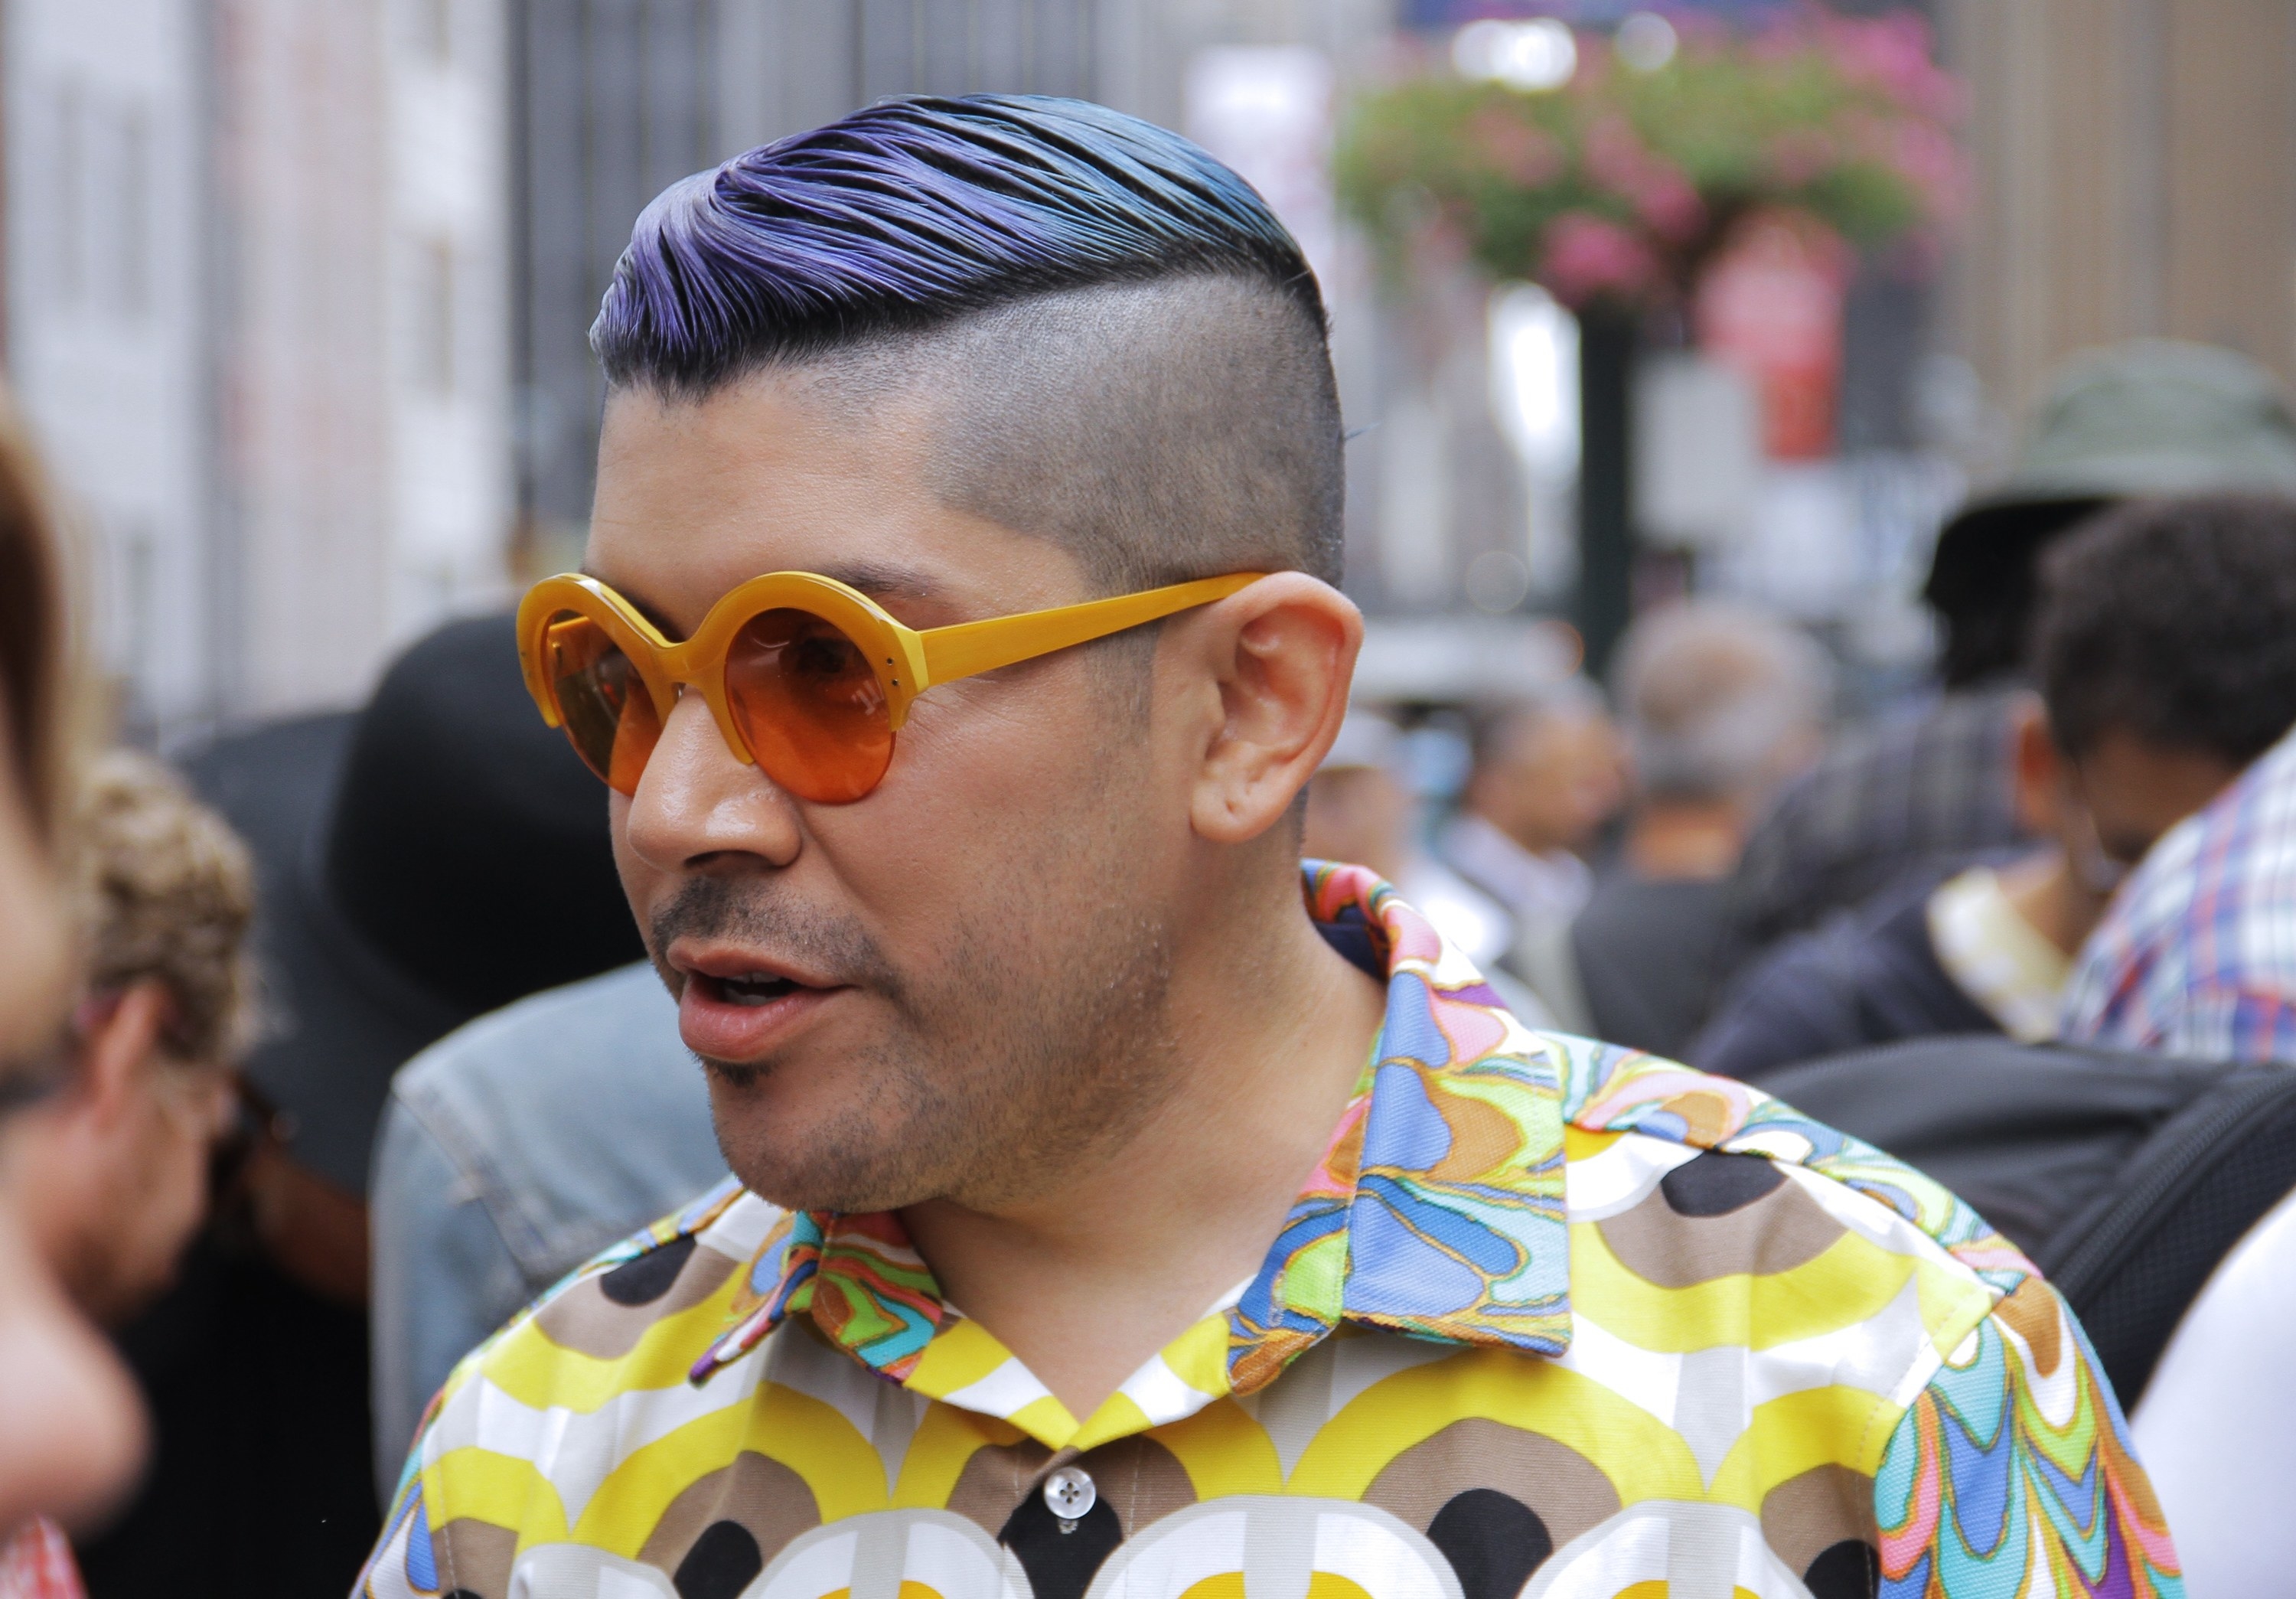 Mondo Guerra is seen on the streets of Manhattan outside the Yigal Azrouel Spring 2016 fashion show